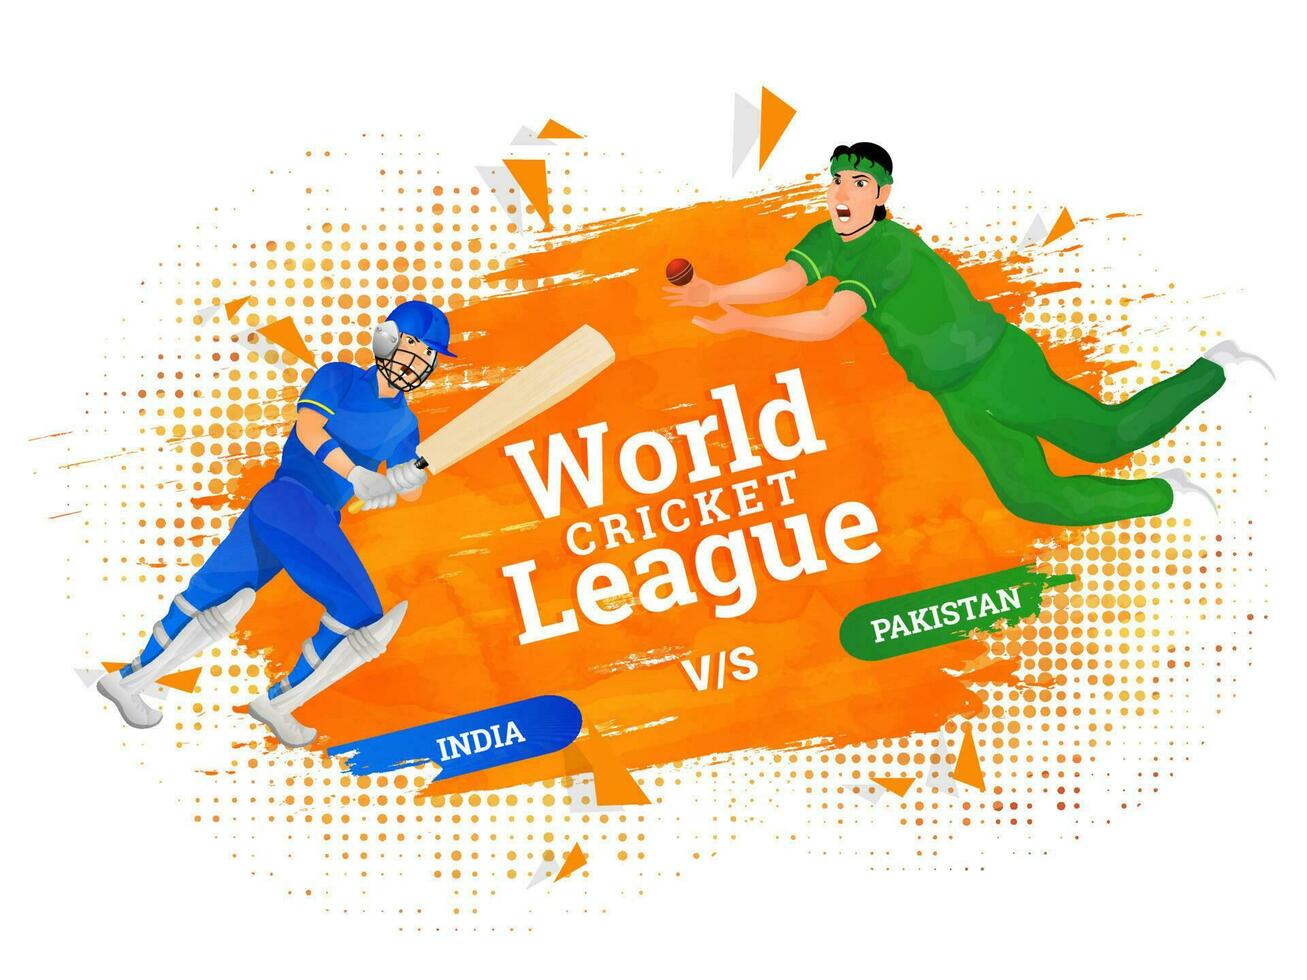 World Cricket League poster design with cricket players character of participant team India VS Pakistan. vector